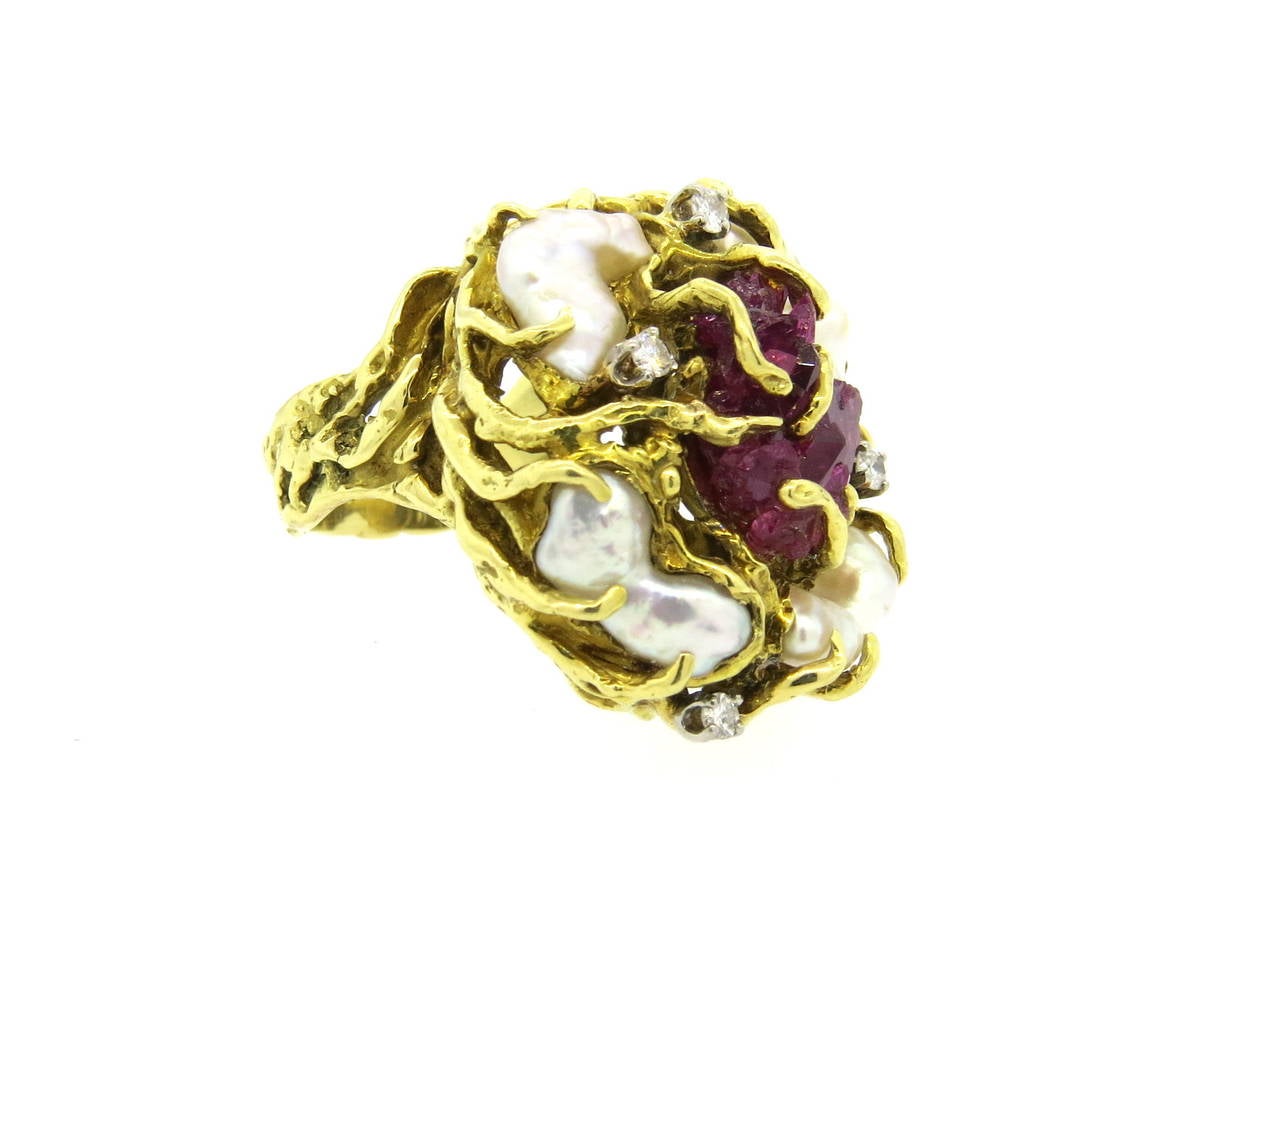 1970s 18k yellow gold free form ring, decorated with chatham ruby, pearls and diamonds. Ring is a size 7 1/4, ring top is 31mm x 27mm. Weight of the piece - 28.9 grams